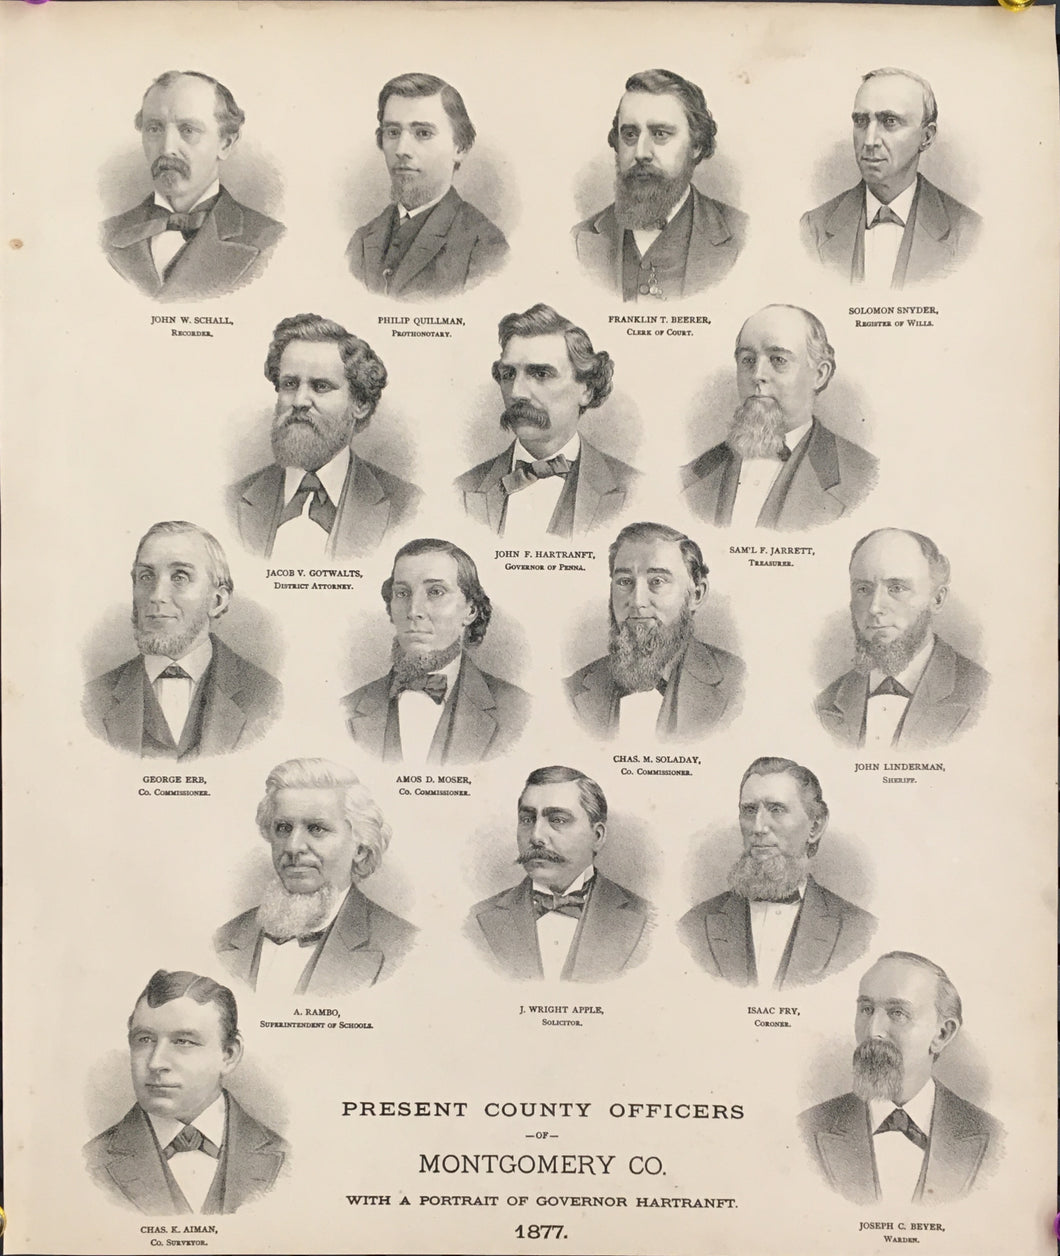 Unattributed  “Present County Officers of Montgomery Co